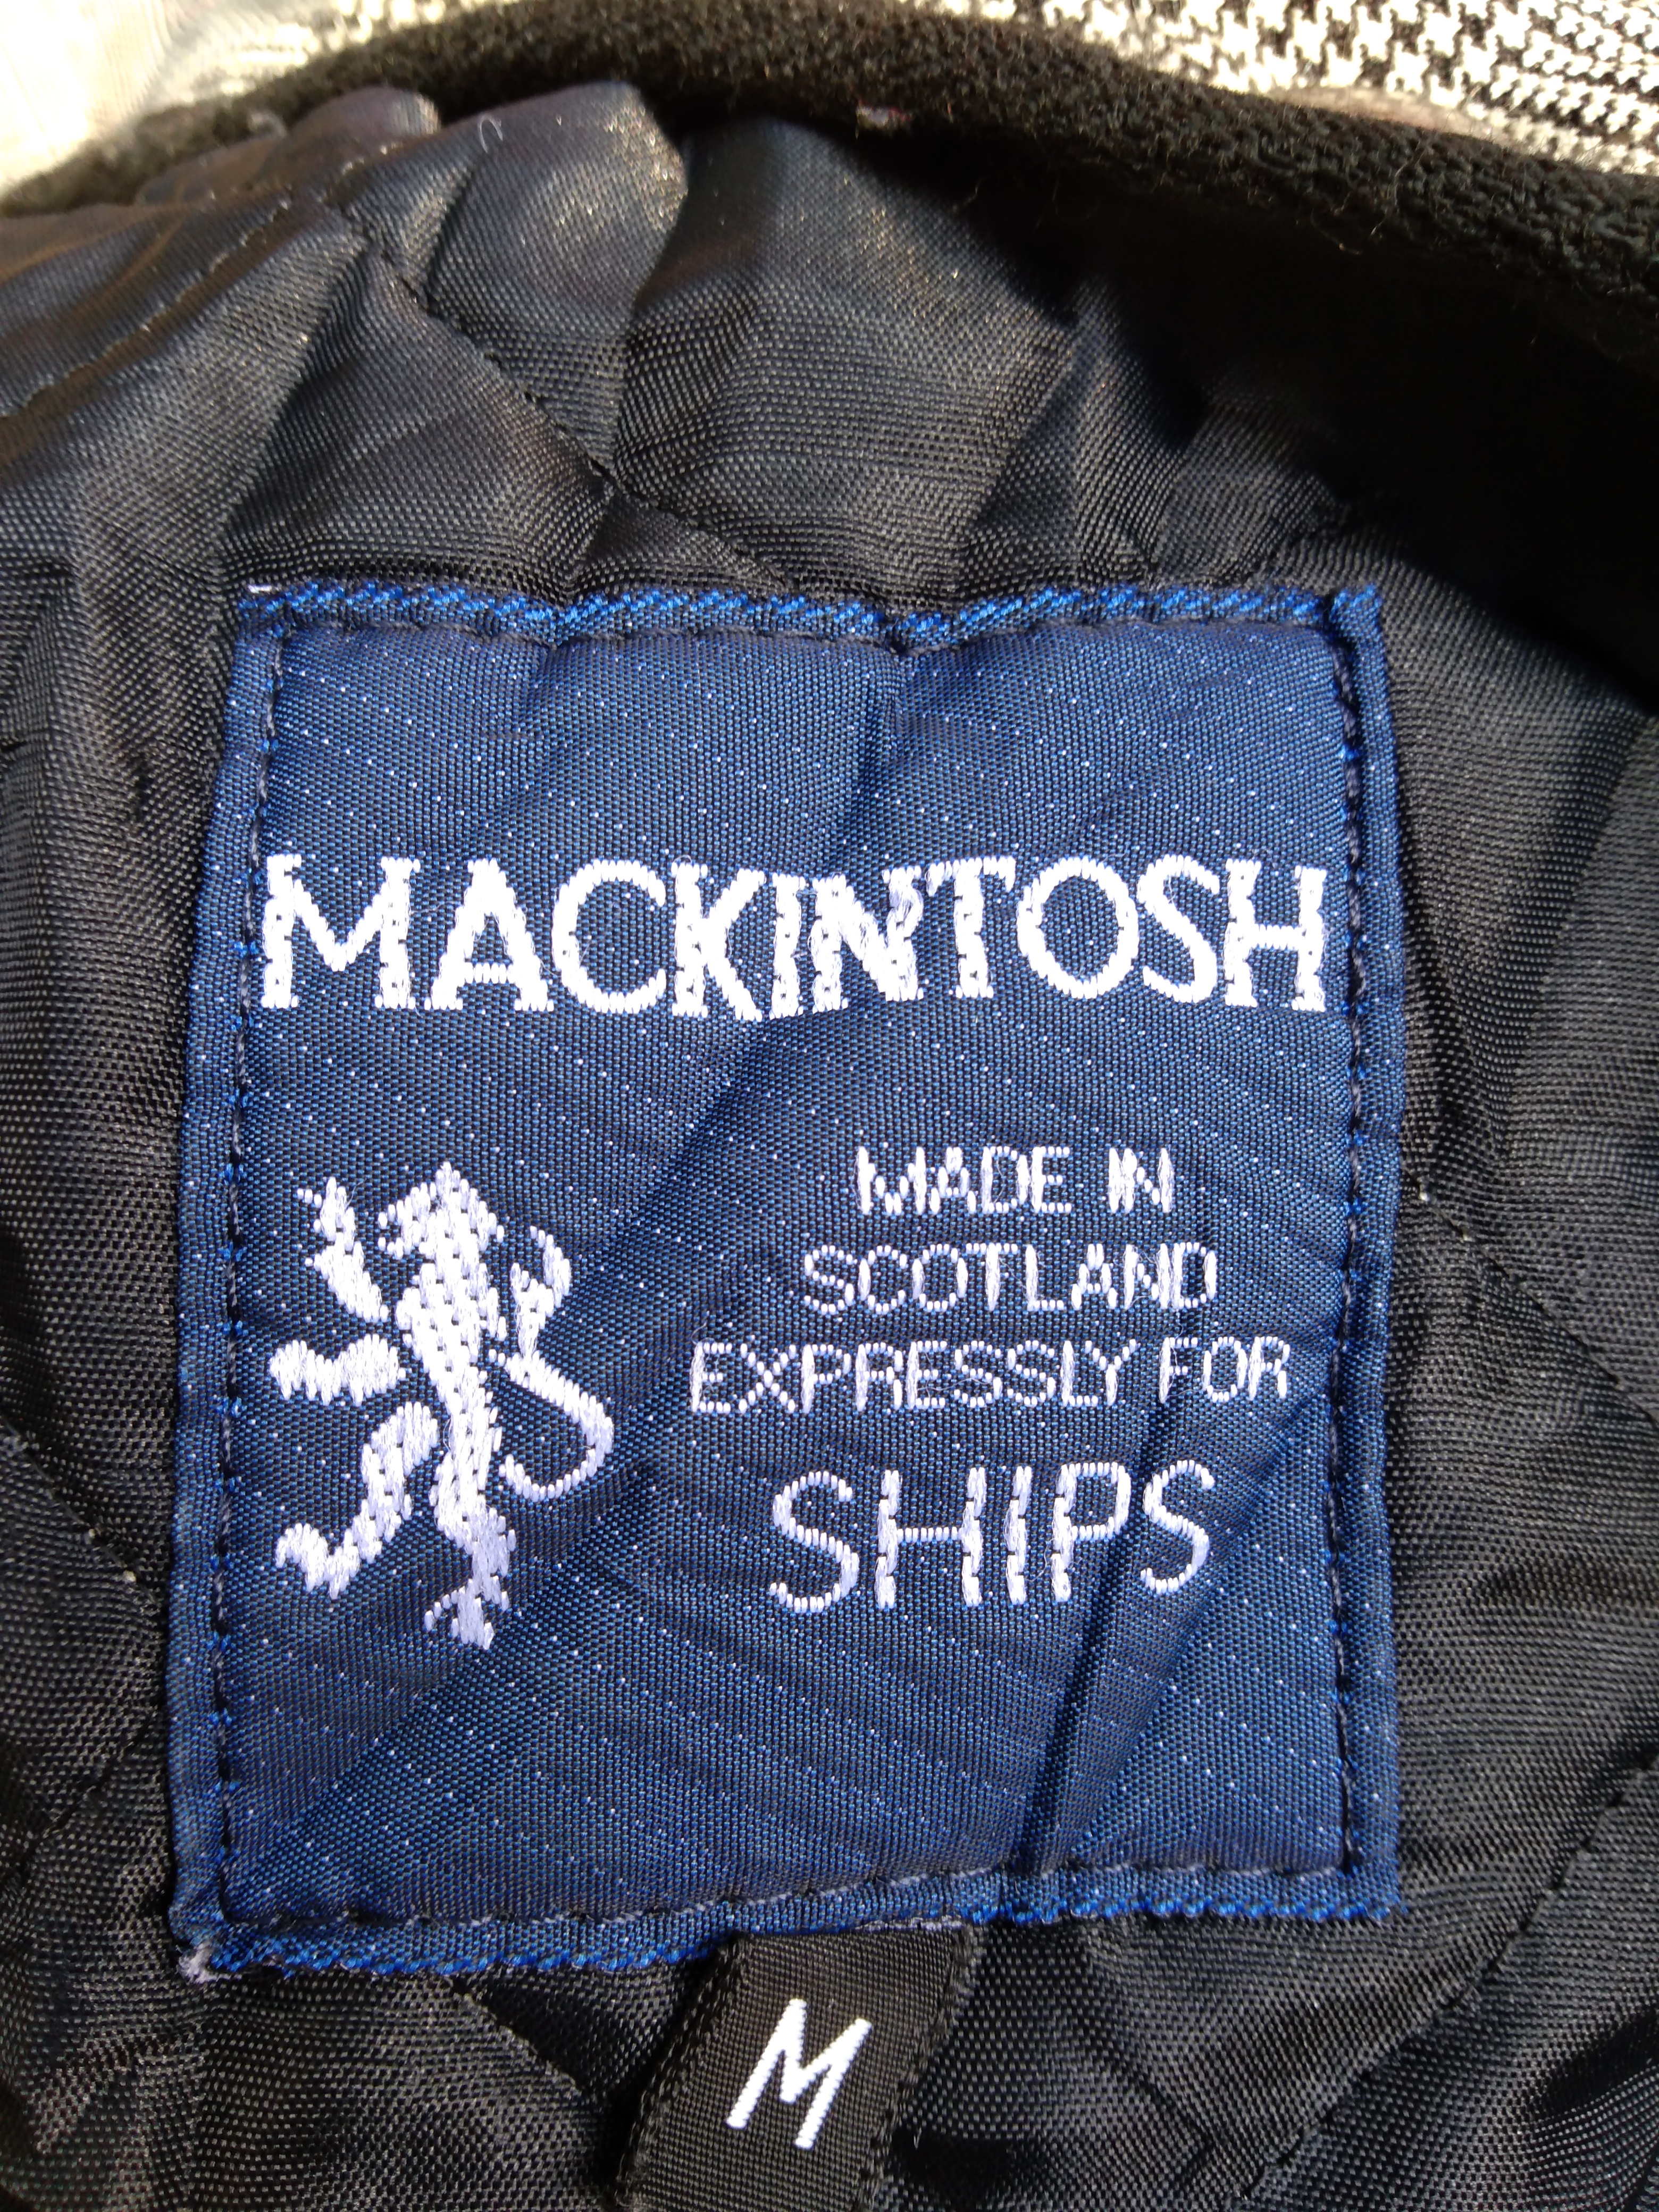 VINTAGE MACKINTOSH x SHIPS QUILTED JACKET - 10